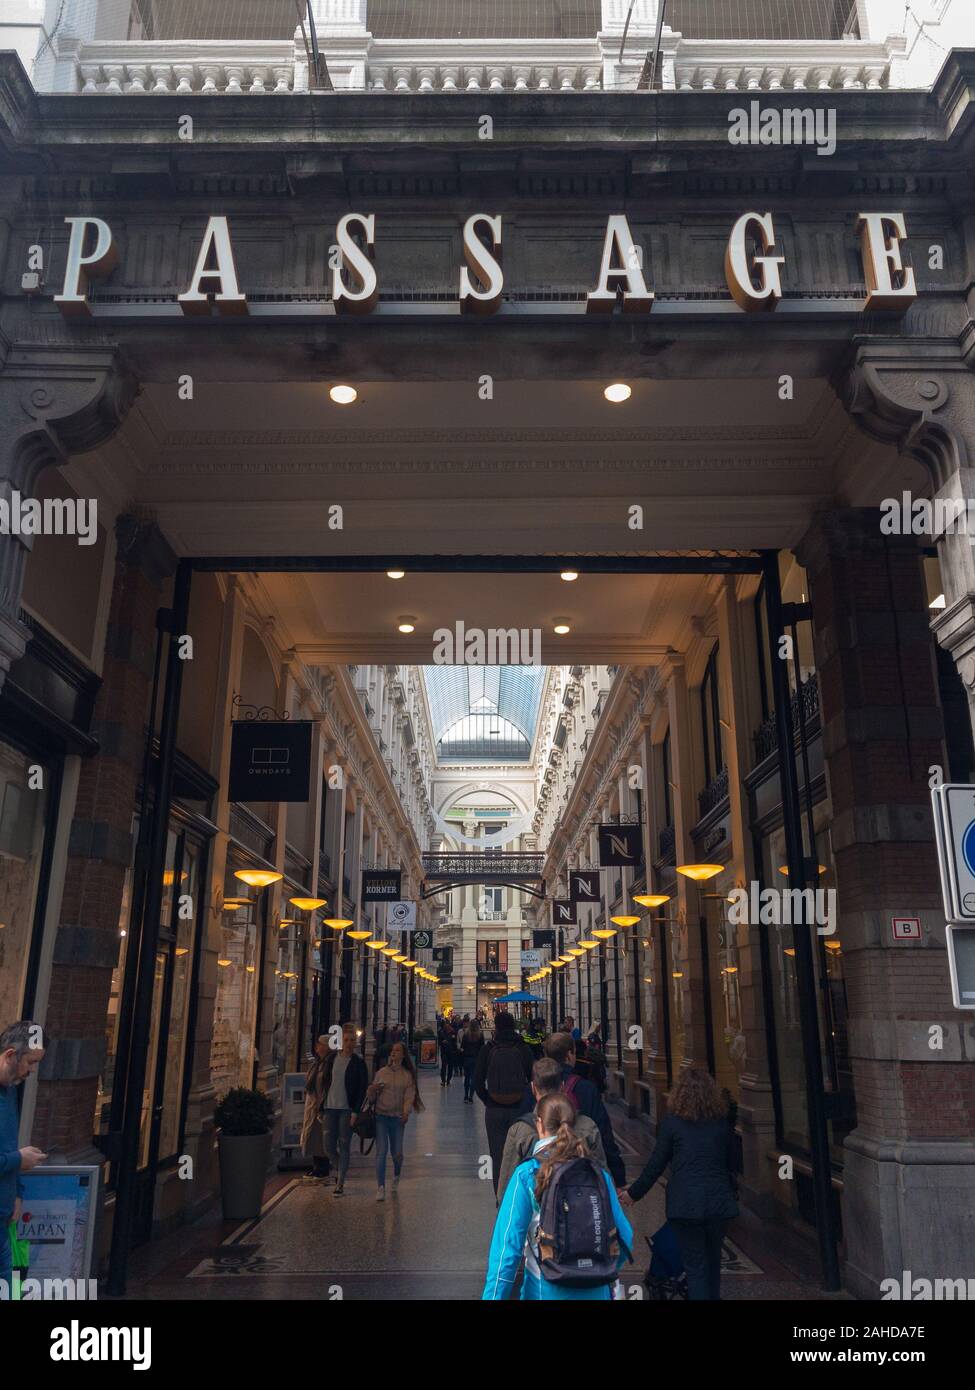 The Hague, Netherlands - October 3, 2017: Incidental people at „De Passage“ - one of the oldest shopping malls in the Netherlands Stock Photo